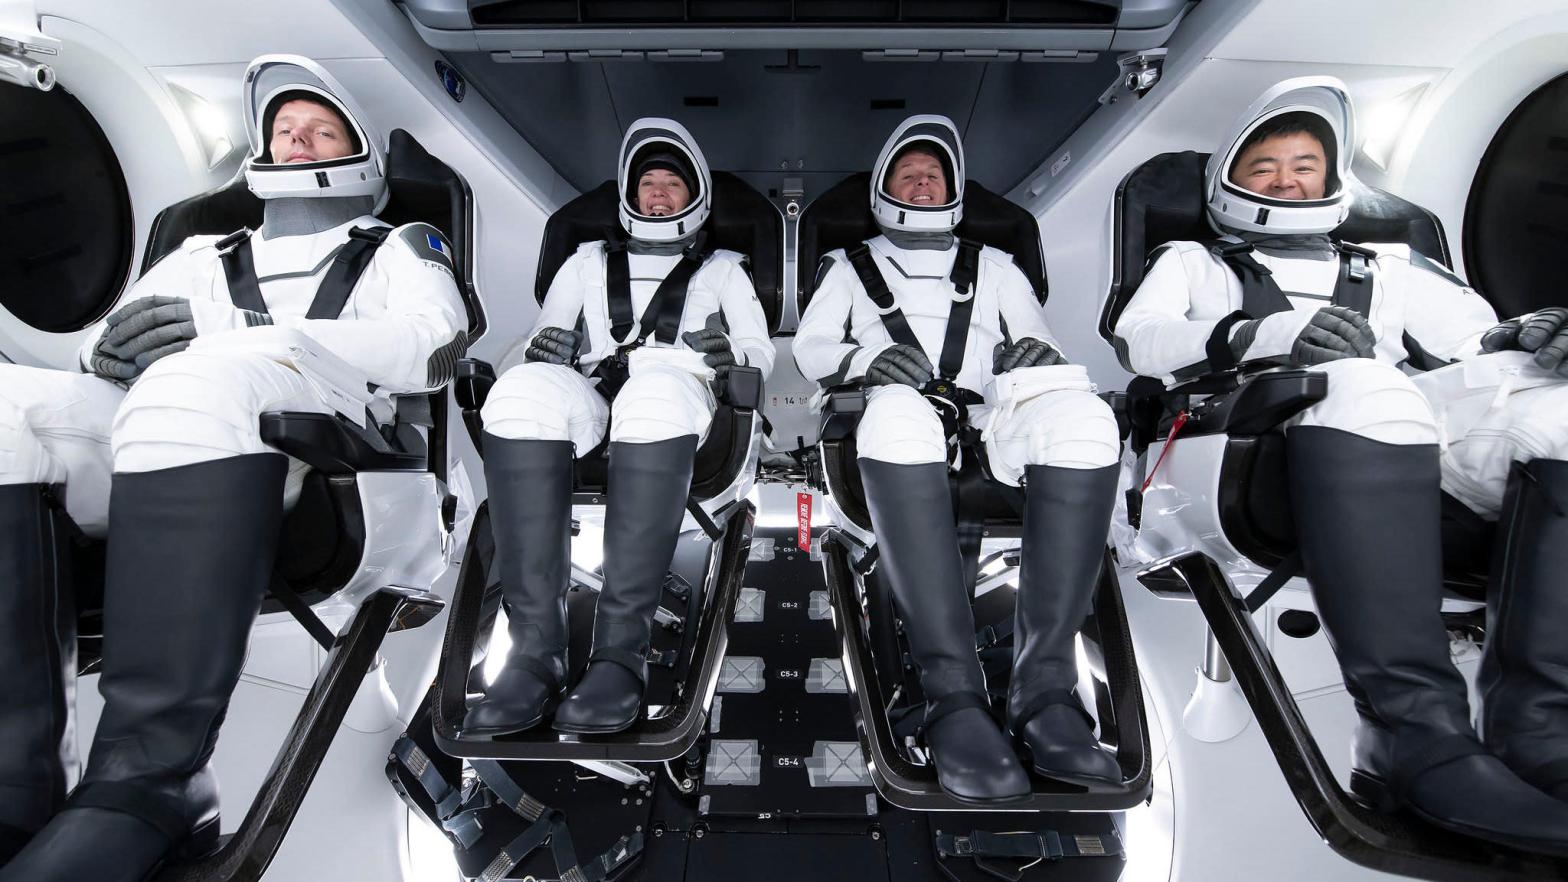 NASA's SpaceX Crew-2, as photographed during a training session. From left are, Mission Specialist Thomas Pesquet of the ESA, Pilot Megan McArthur of NASA, Commander Shane Kimbrough of NASA, and Mission Specialist Akihiko Hoshide from JAXA. (Image: SpaceX)